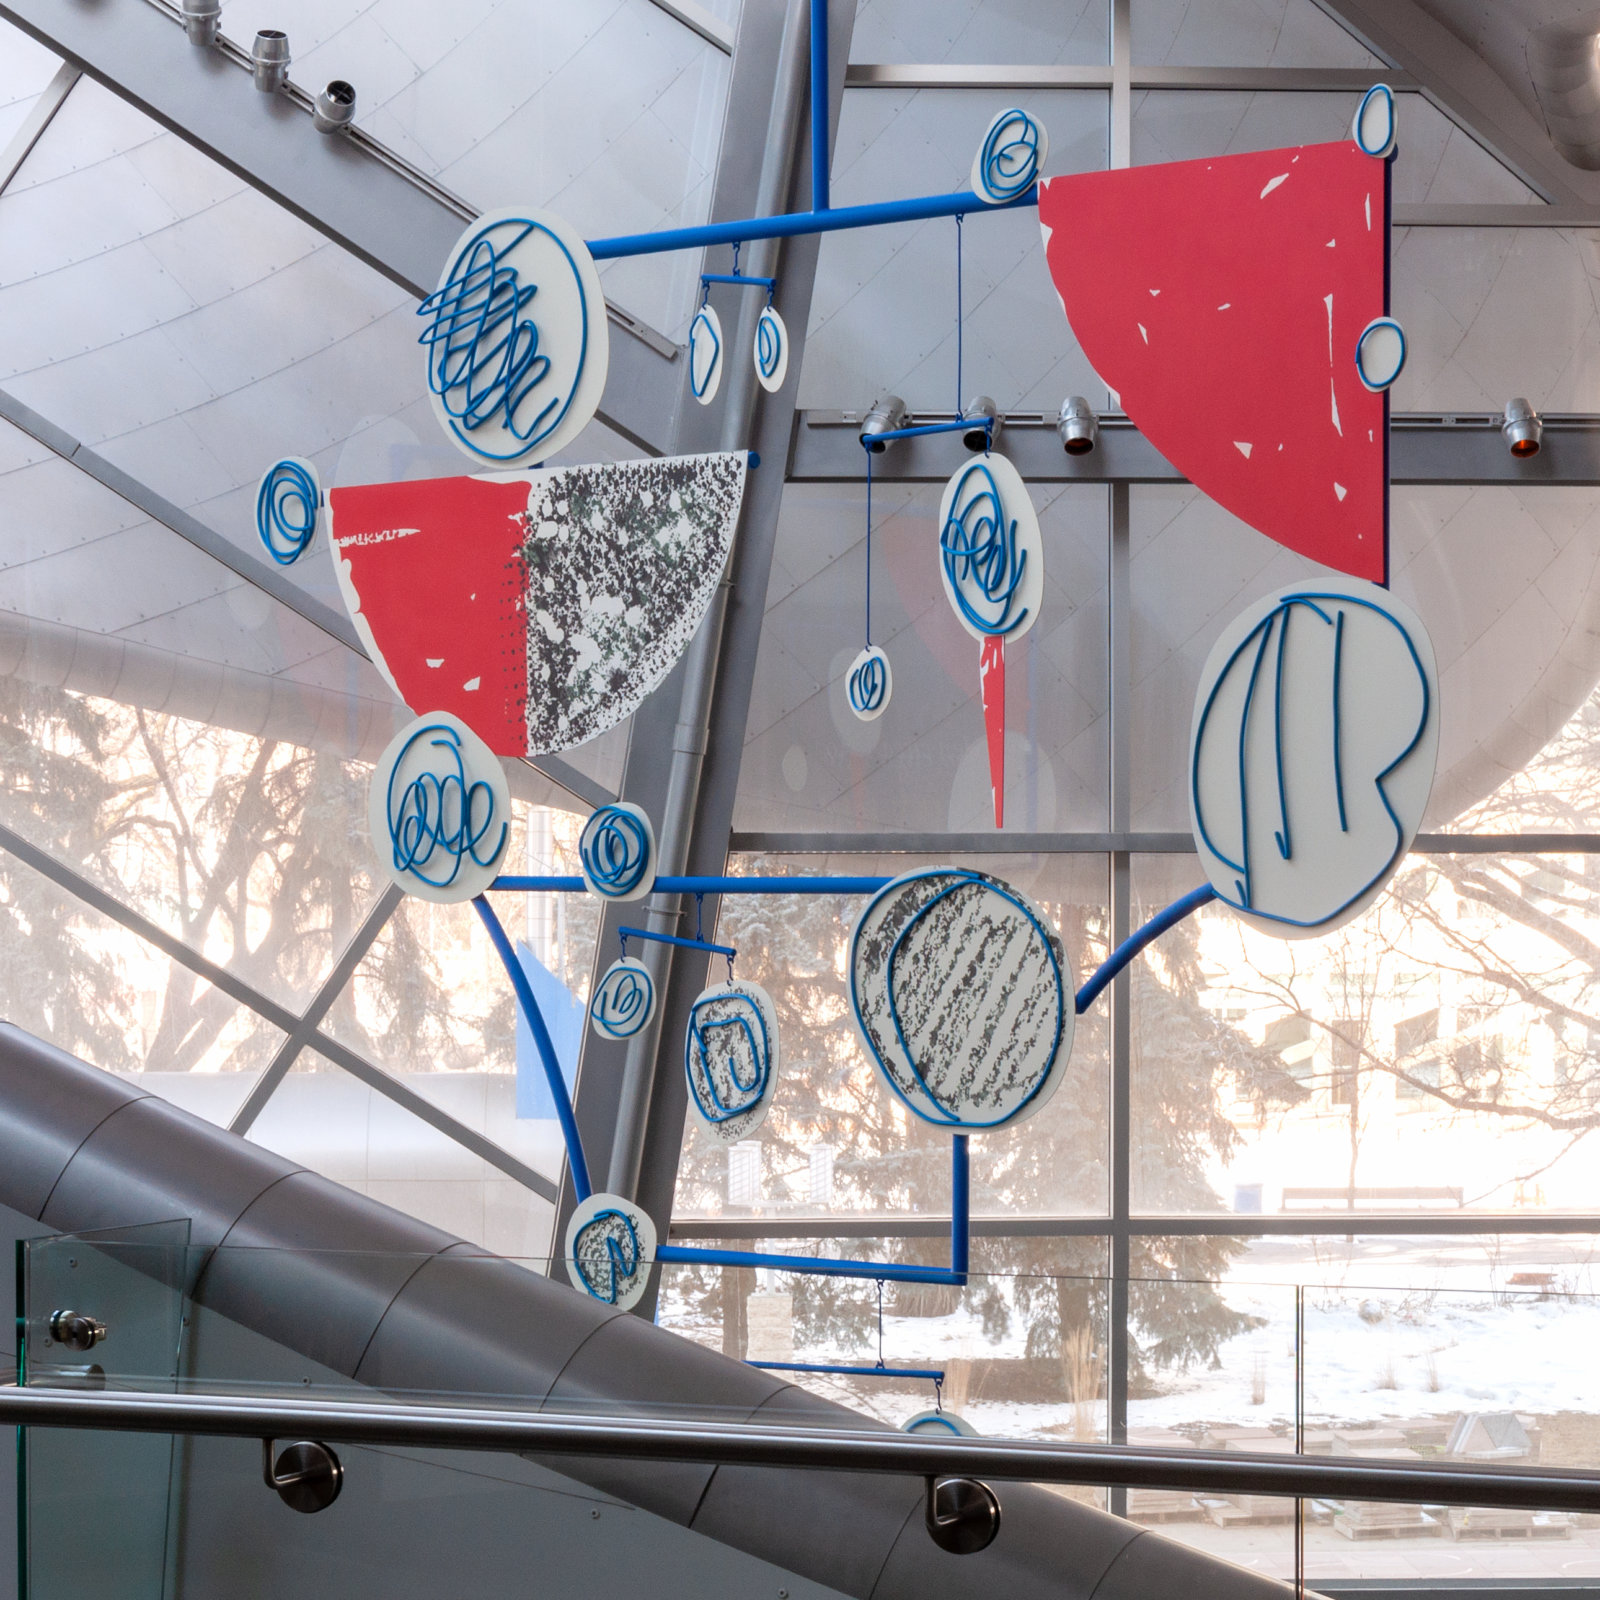 Damian Moppett, Untitled Abstract Drawing in Space, 2020, stainless steel, aluminum plate, copper pipe, enamel, 190 x 196 in. (481 x 497 cm). Installation view, Art Gallery of Edmonton, 2020